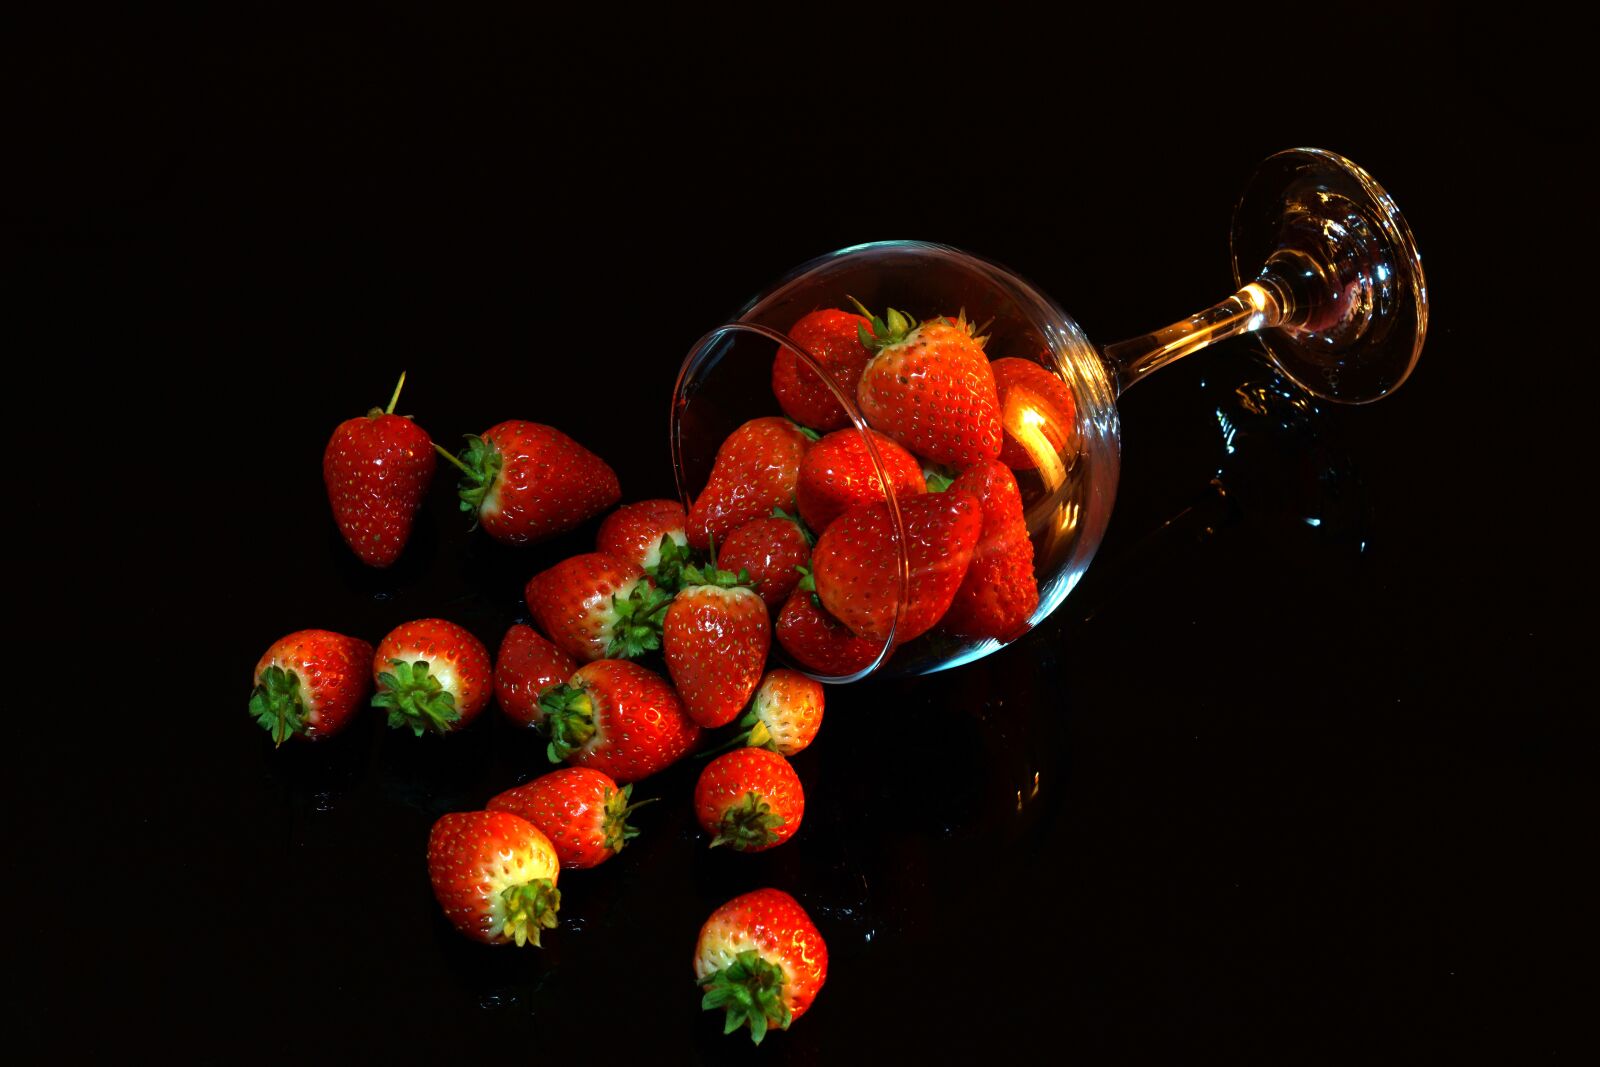 Sony SLT-A68 sample photo. Strawberries, glass, juicy photography